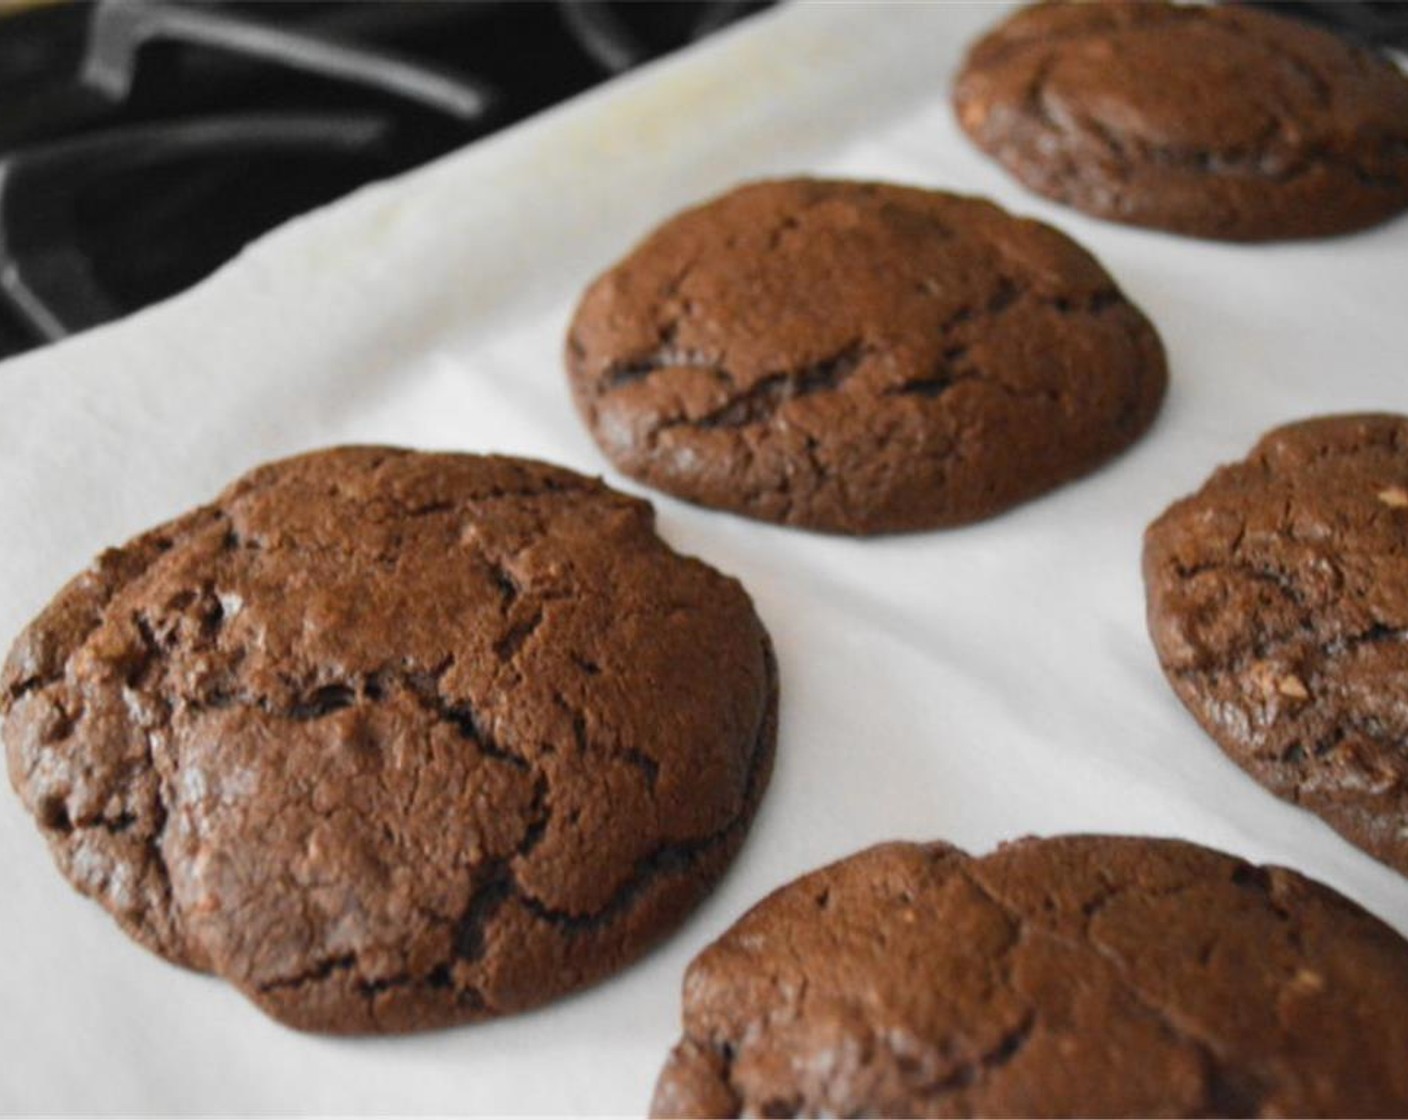 step 7 Bake the chocolate hazelnut cookies for about 15 minutes or until the edges just start to get crisp and they are cooked through.